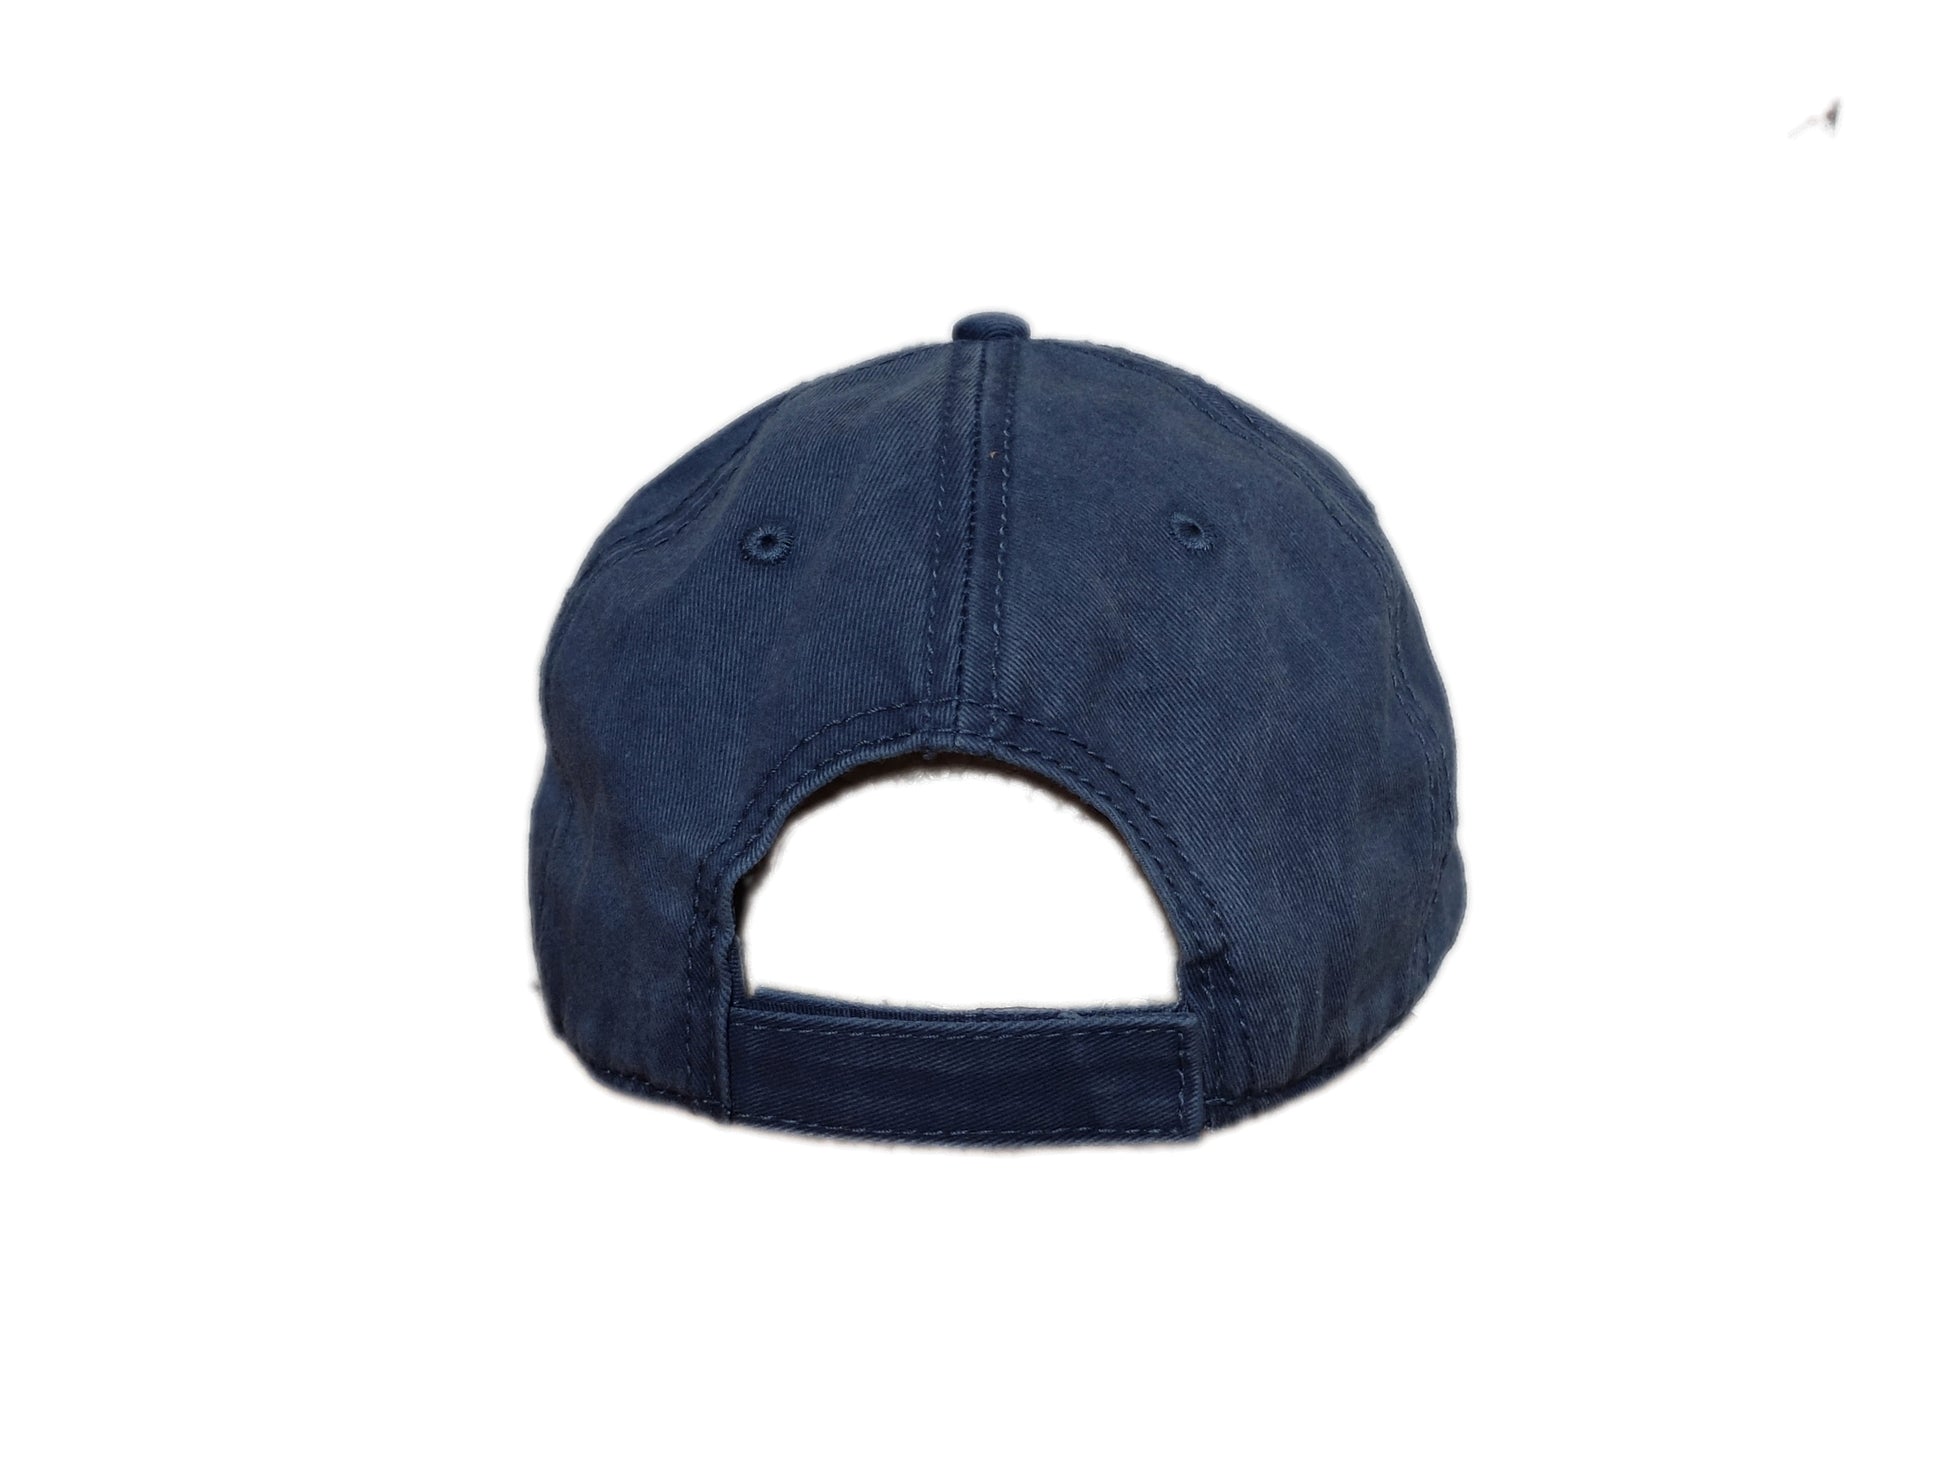 back side view of navy blue dad hat with square patch showing fish under waves